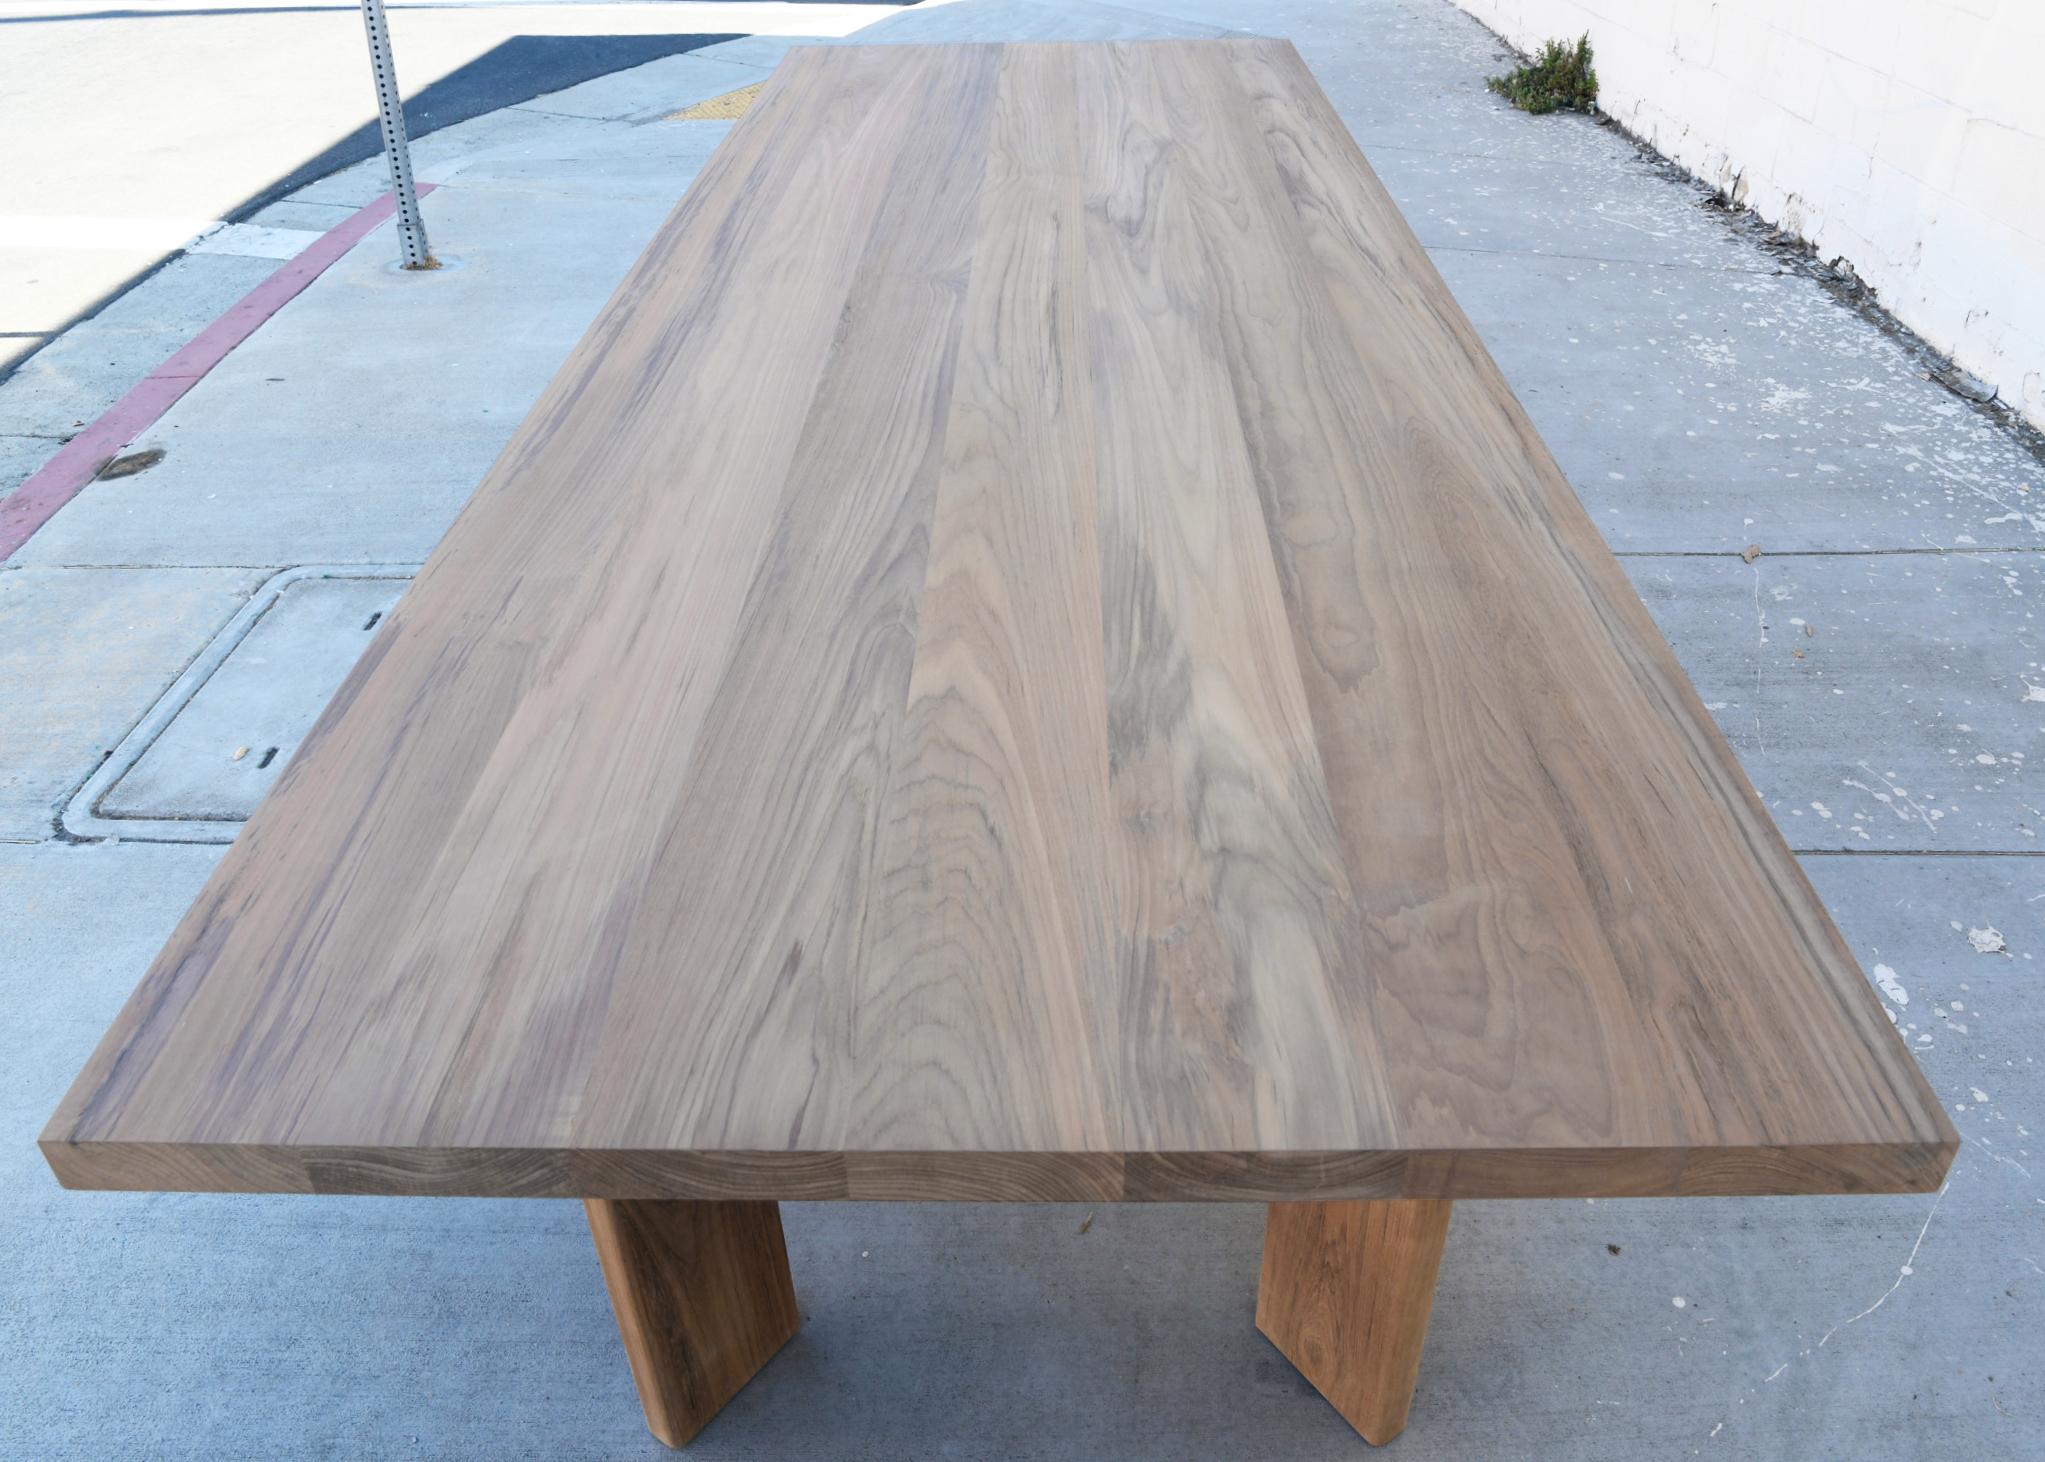 Modern Lia Dining Table Made from Teak (indoor or outdoor) For Sale